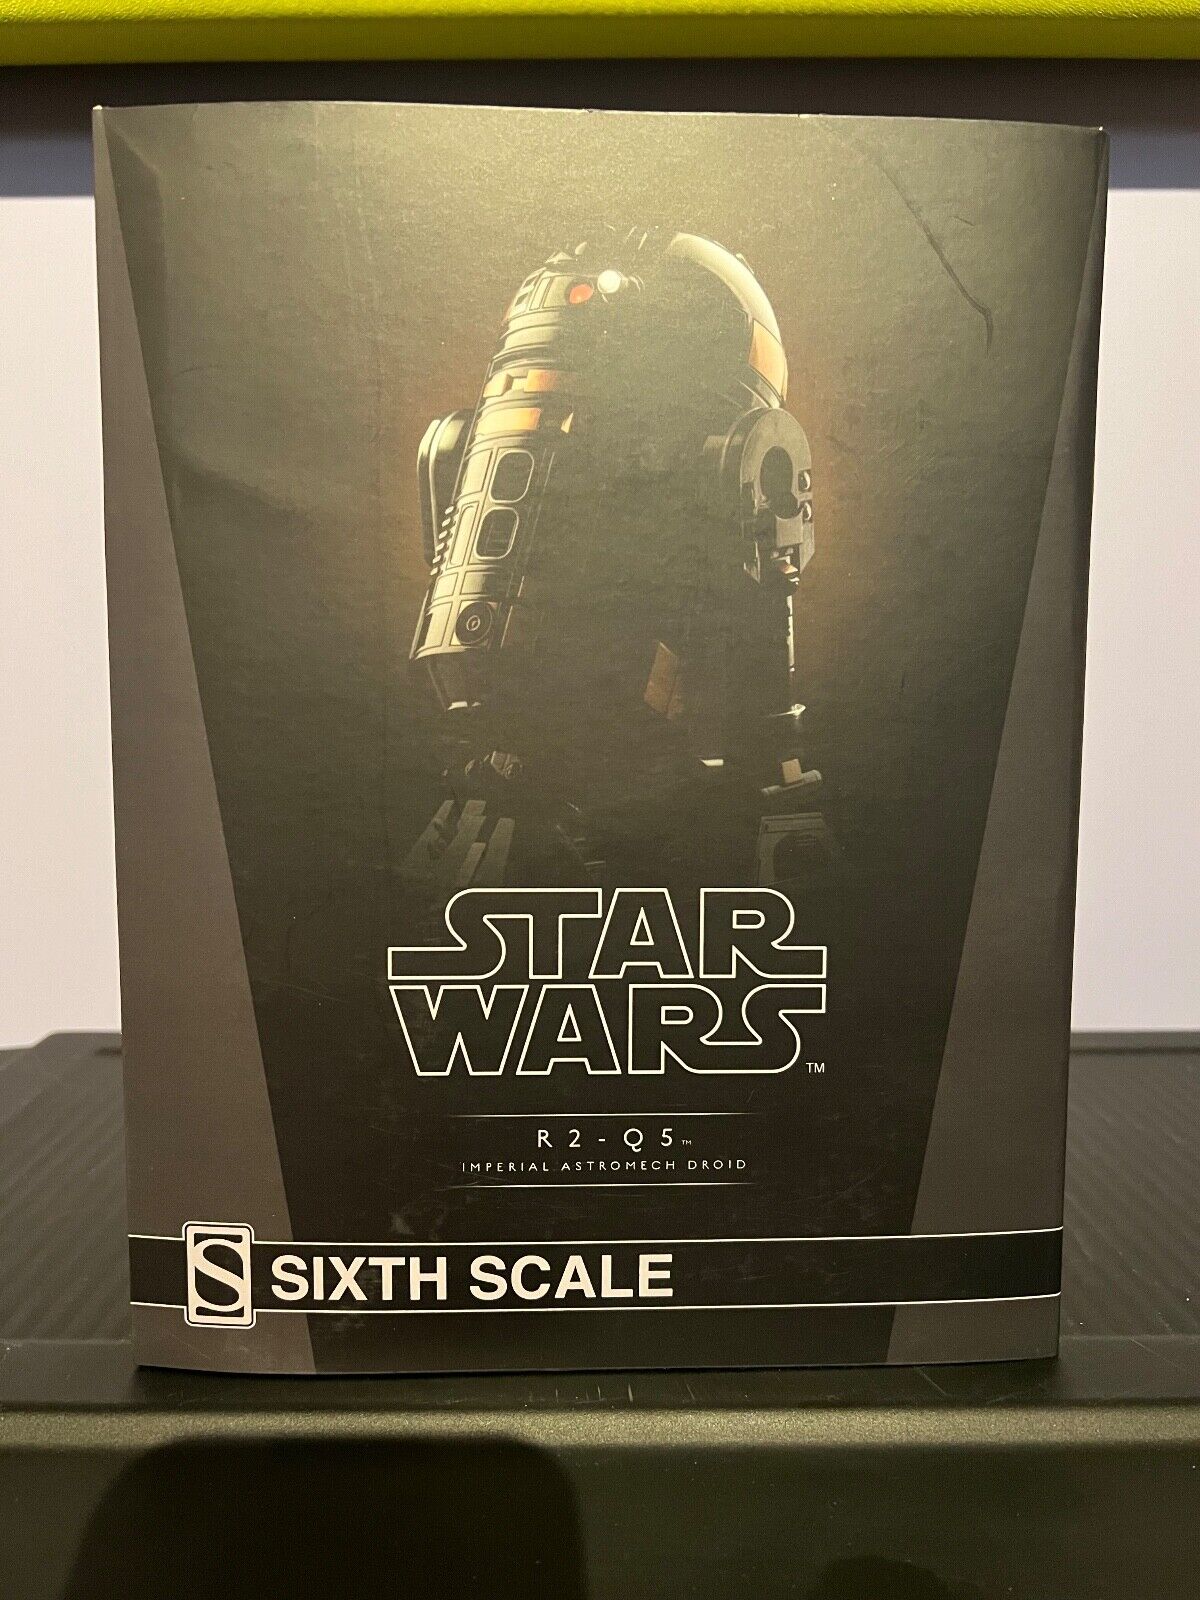 R2Q5 IMPERIAL ASTROMECH DROID Sixth Scale Figure by Sideshow Collectibles